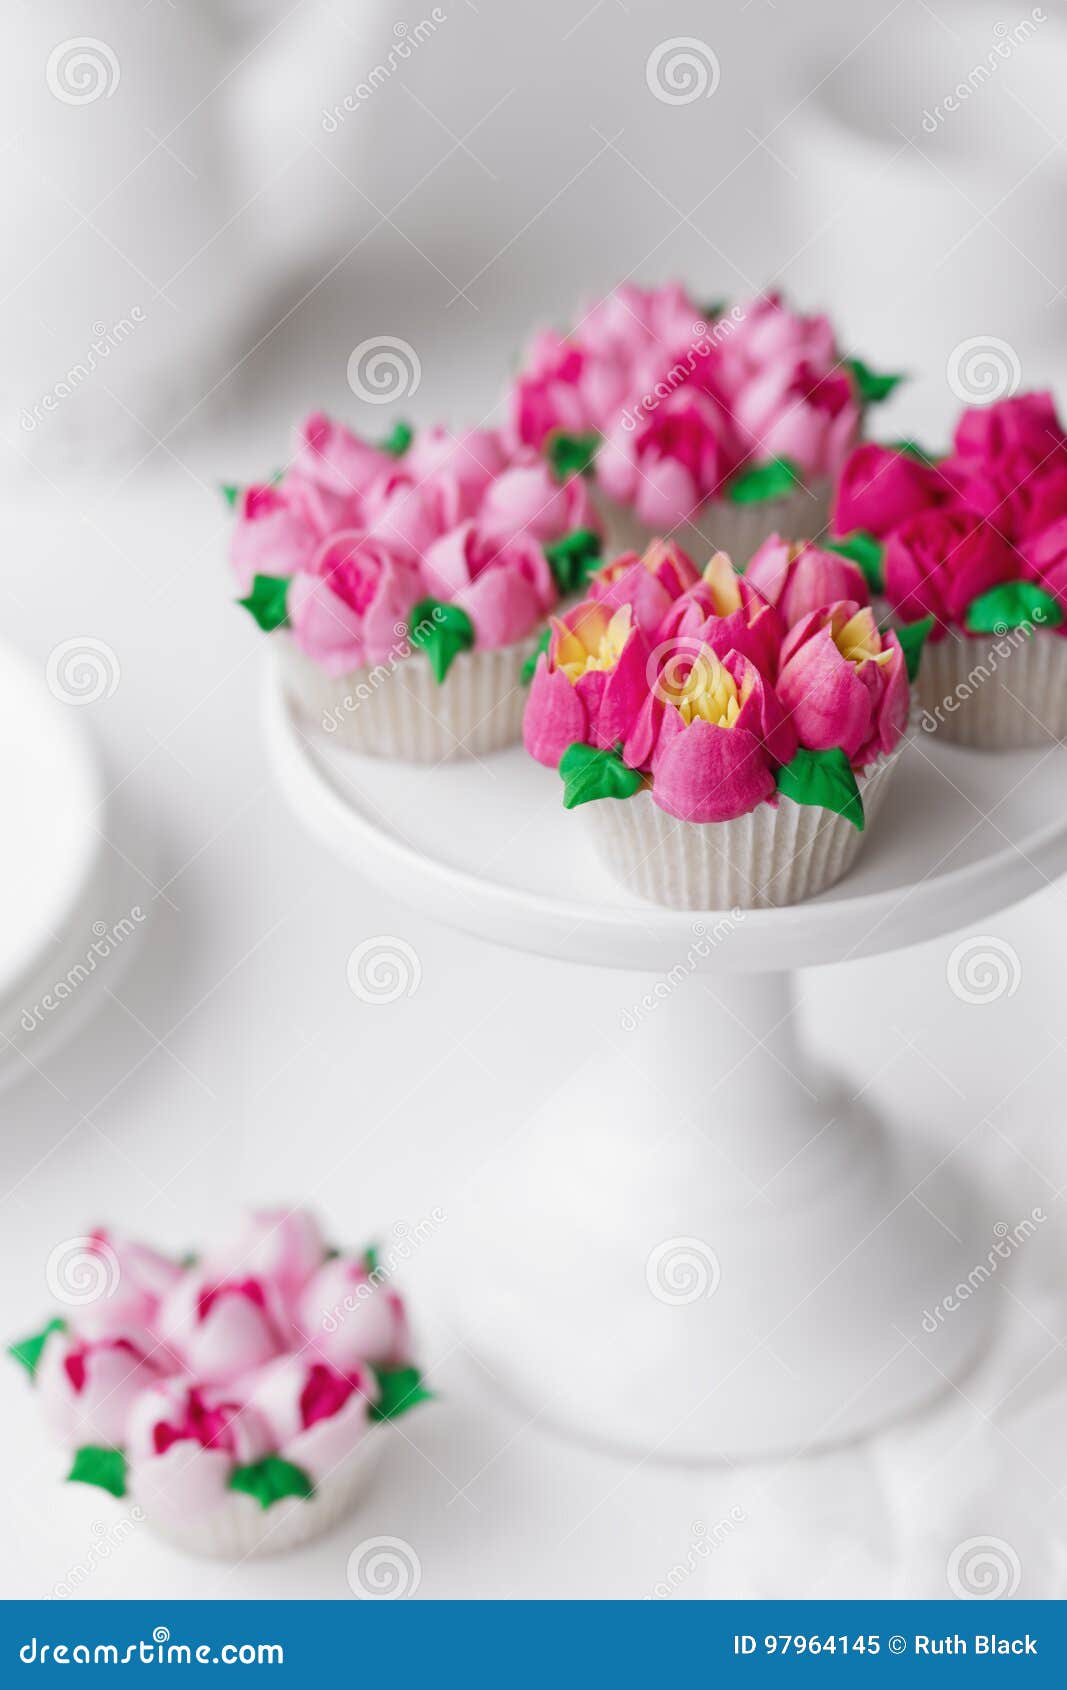 200 Best Russian Piping Tips ideas | russian piping tips, cake decorating  tips, cupcake cakes